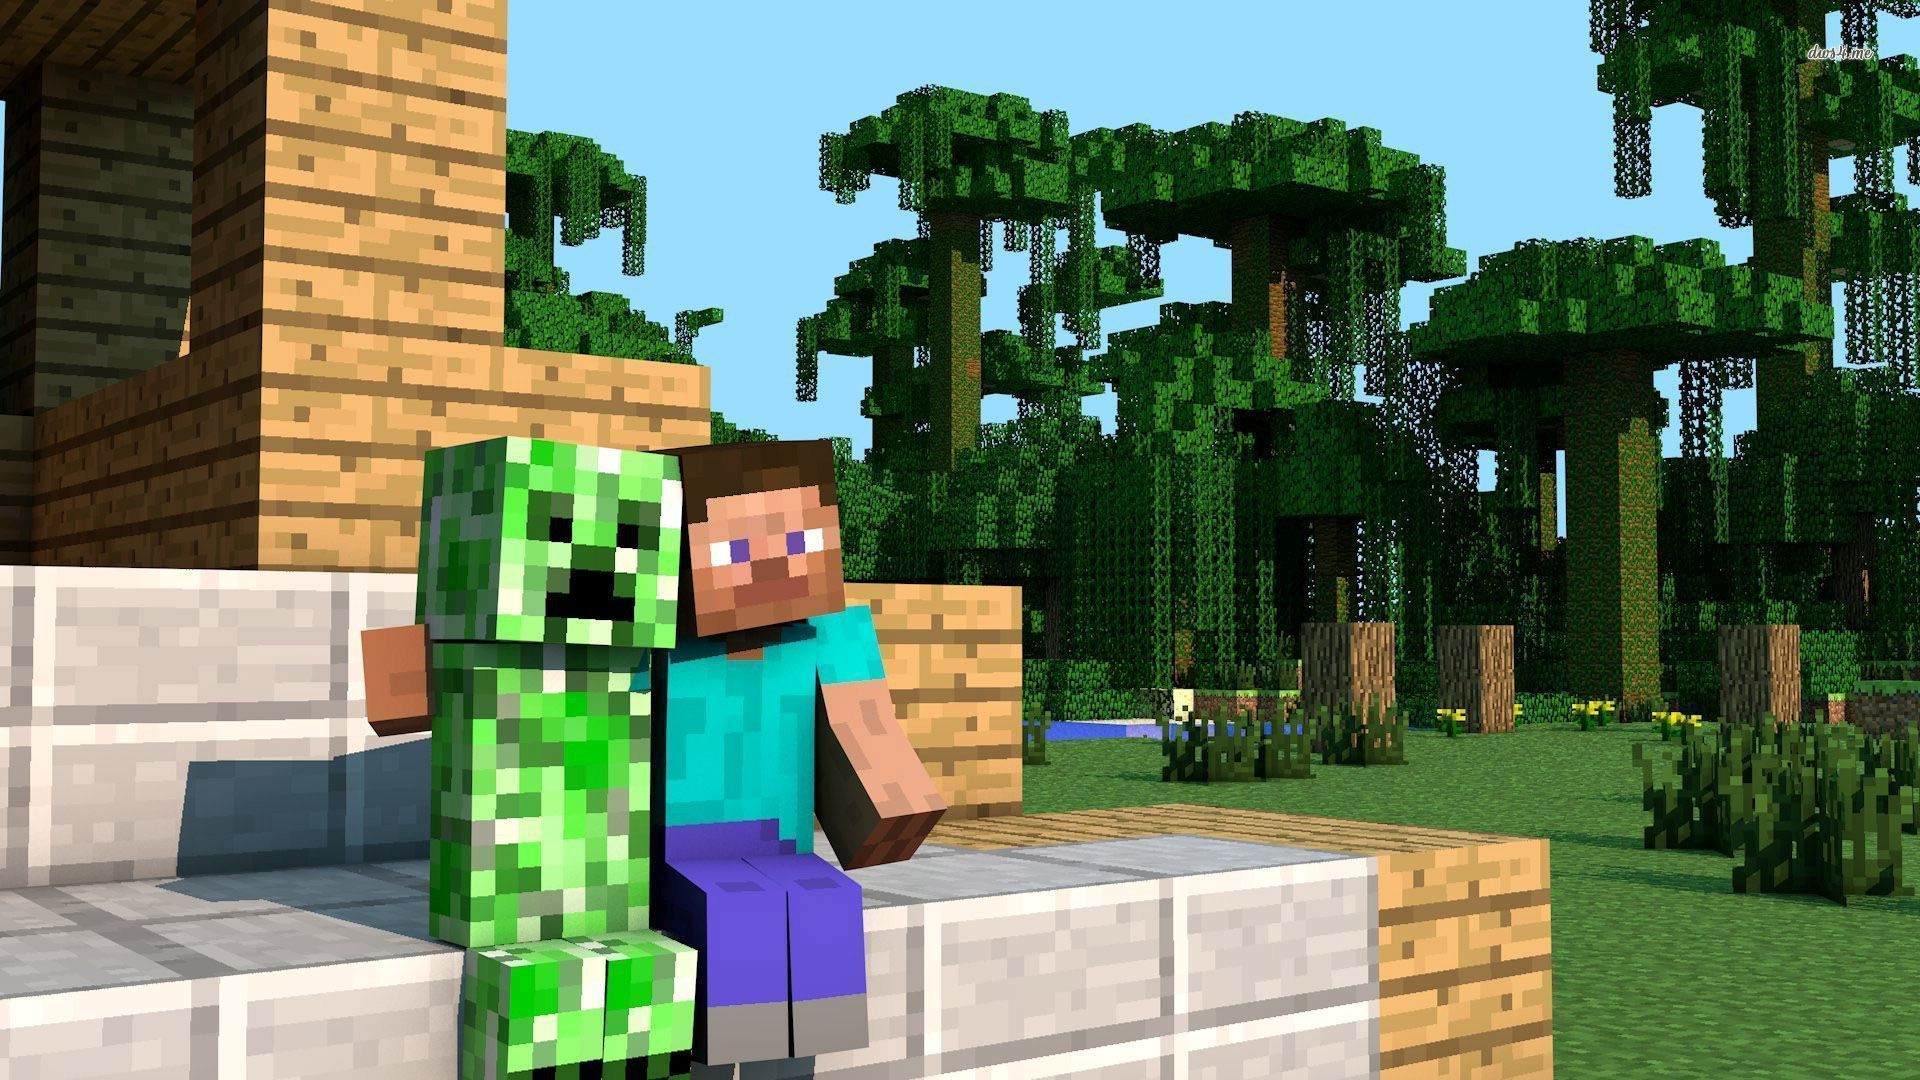 Creeper - Minecraft wallpaper - Game wallpapers - #30429